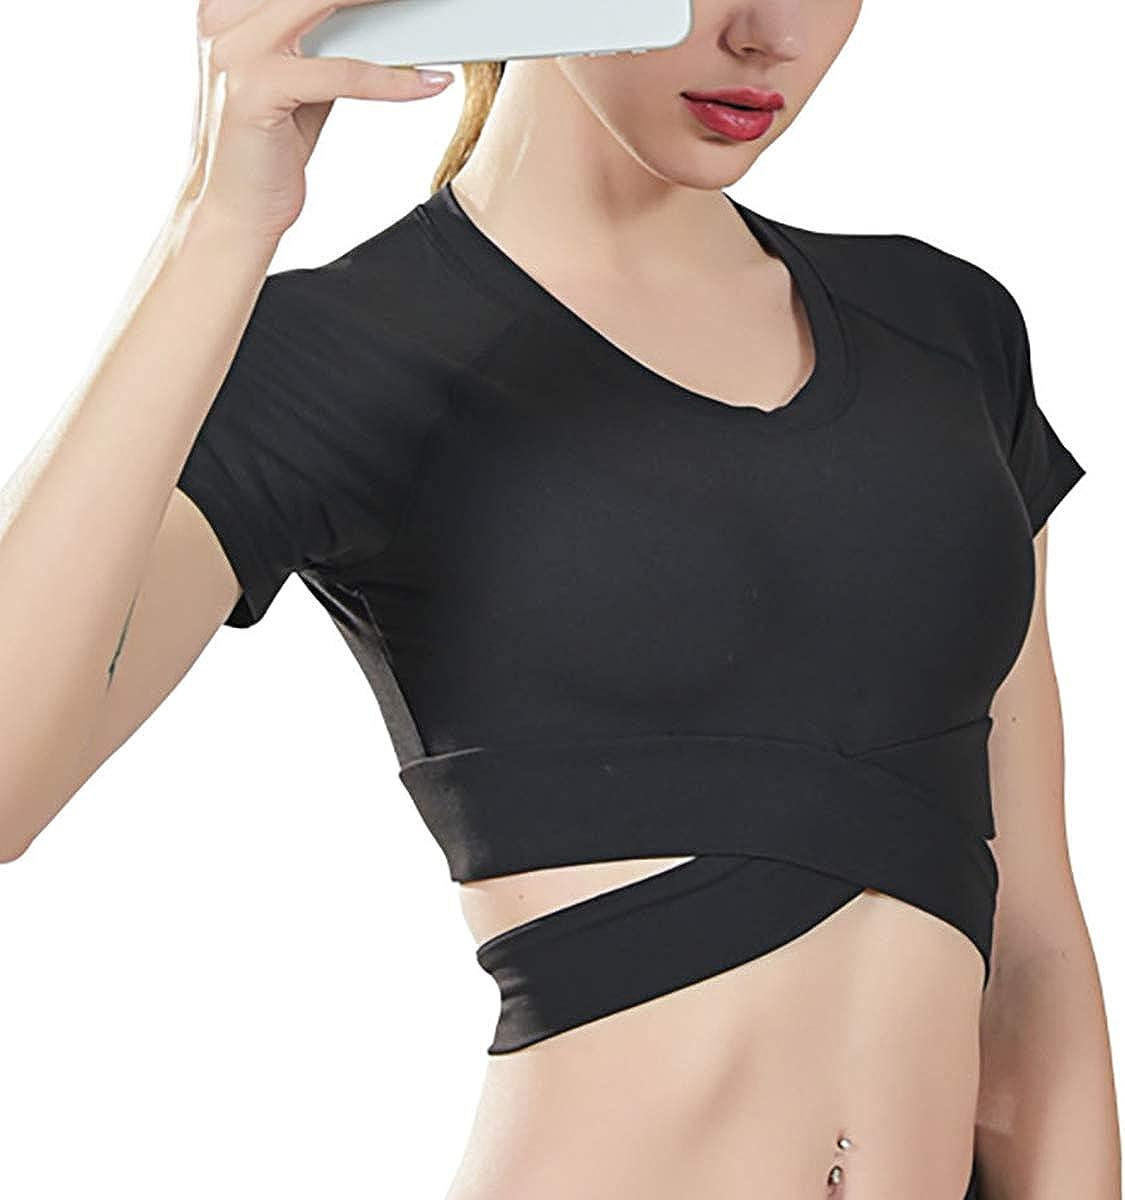 DREAM SLIM Short Sleeve Workout Tops for Women Girls Stretchy Slim Fit  Running Sports Shirts Dry Fit Mesh Yoga Gym Top